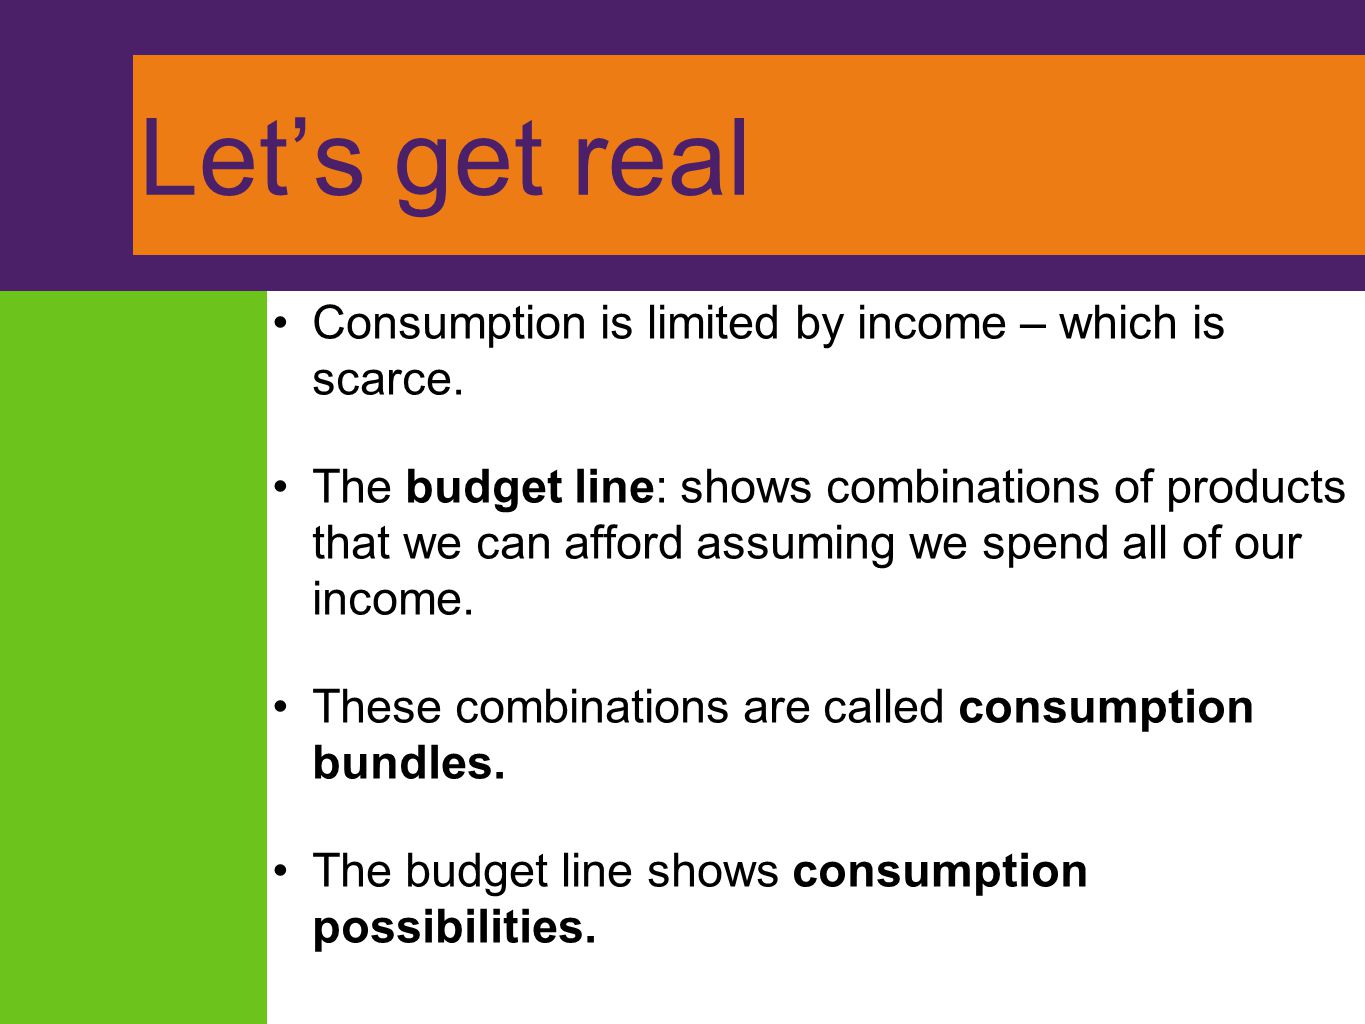 Let’s get real Consumption is limited by income – which is scarce.